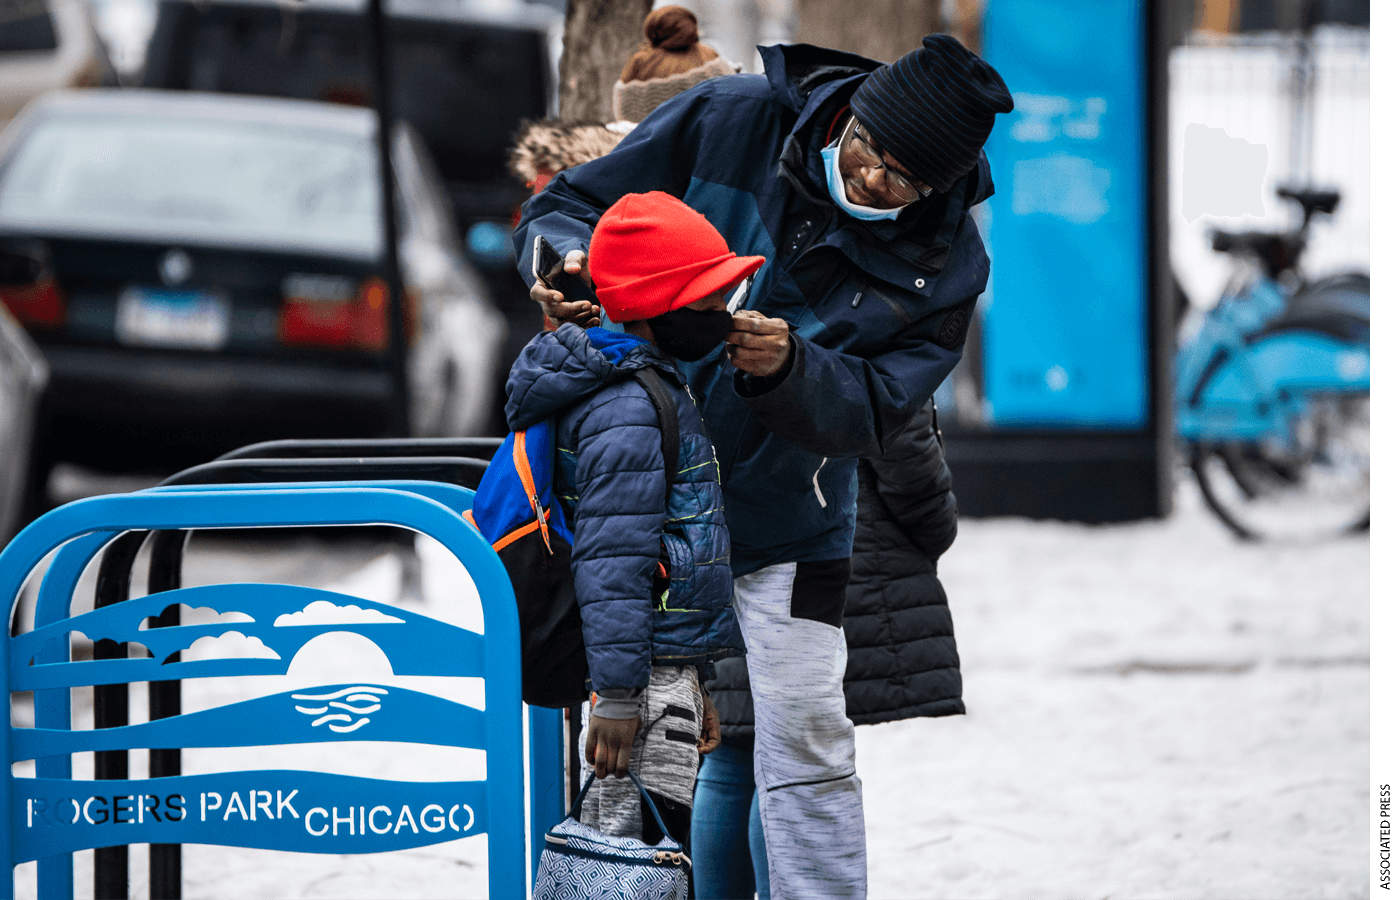 A man adjusts a boy's face mask as they arrive at Jordan Community Public School in Rogers Park on the North Side, Wednesday, Jan. 12, 2022 in Chicago. Students returned to in-person learning Wednesday after a week away while the Chicago Public Schools district and the Chicago Teachers Union negotiated stronger COVID-19 protections.